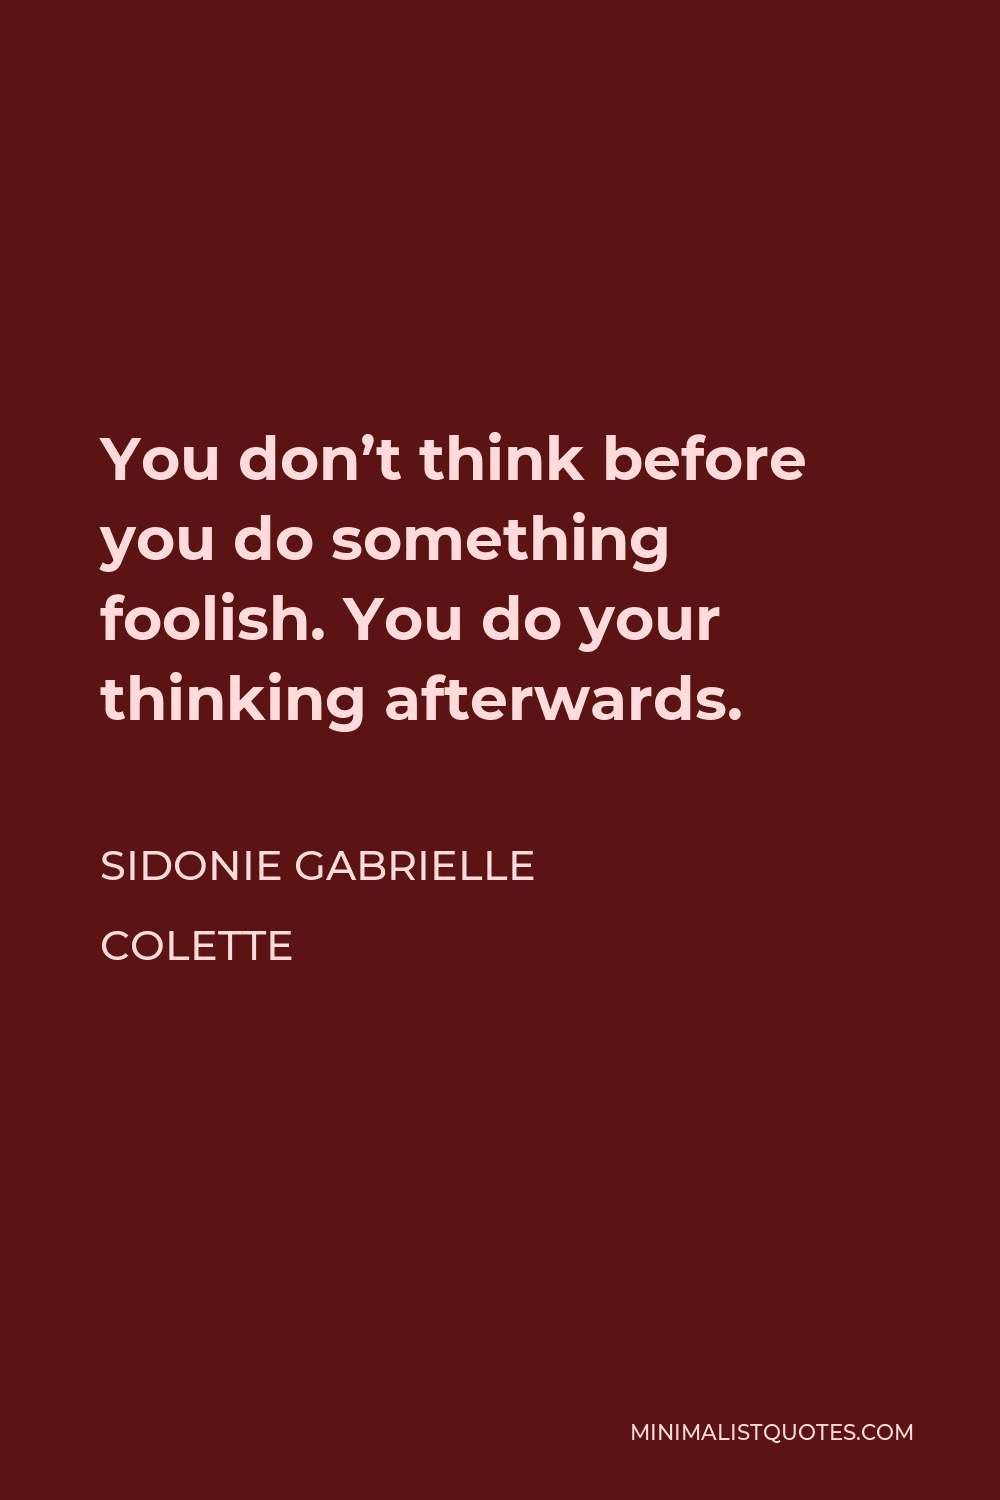 Sidonie Gabrielle Colette Quote - You don’t think before you do something foolish. You do your thinking afterwards.